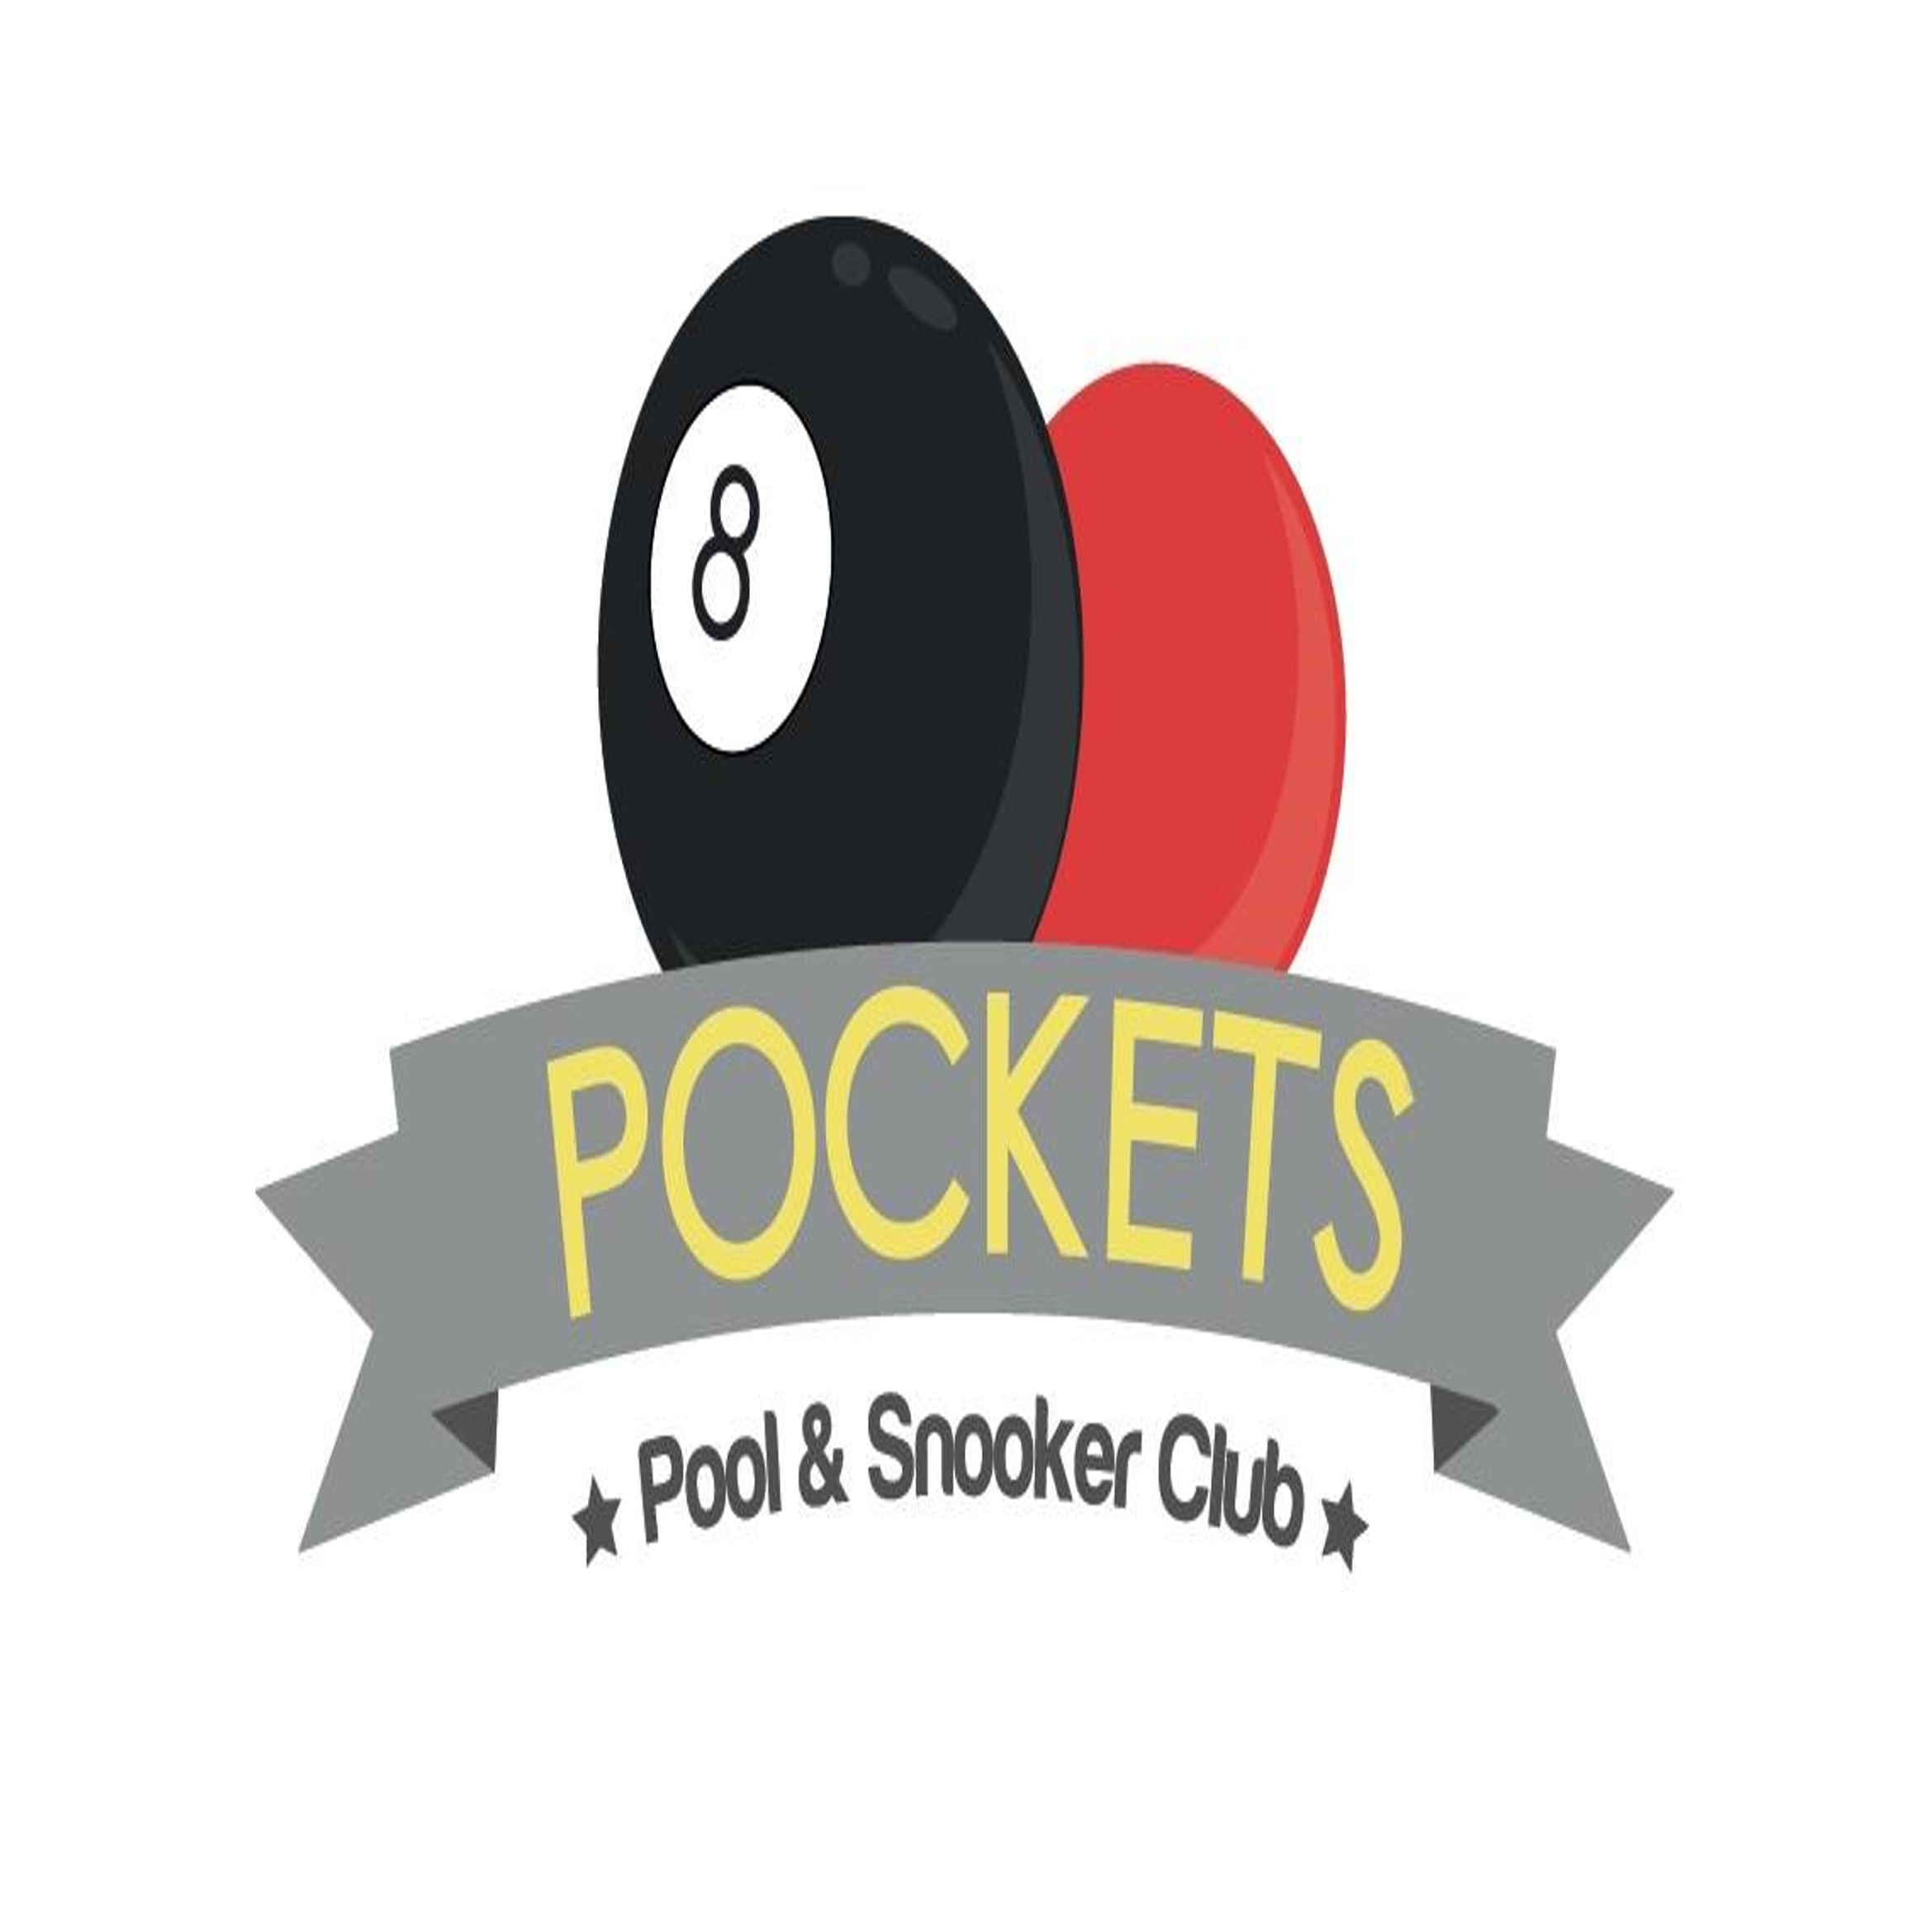 Pockets Pool and Snooker Club